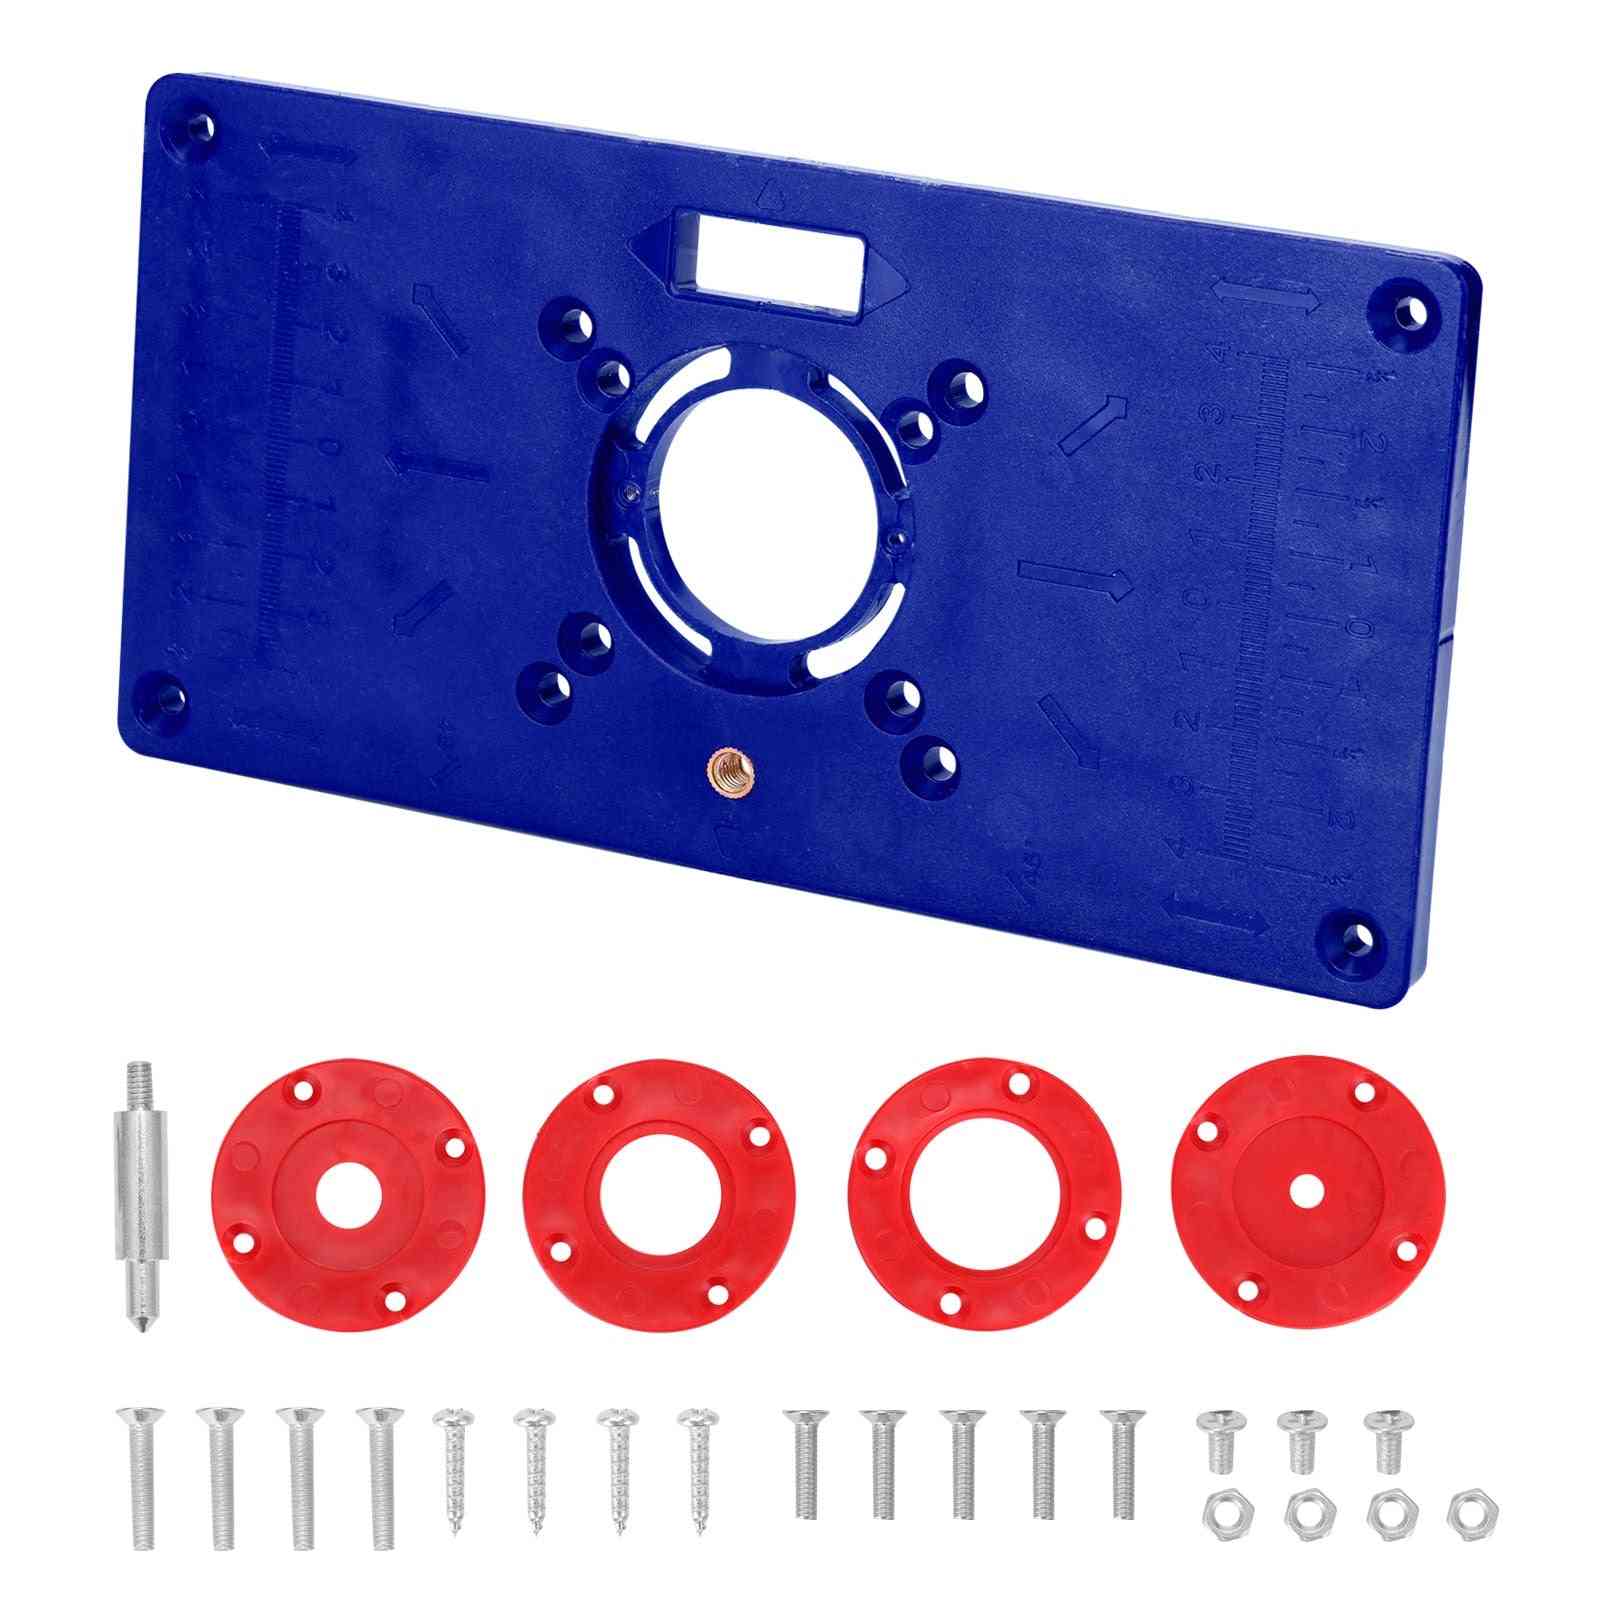 Multifunctional Router Table Plate With 4 Rings